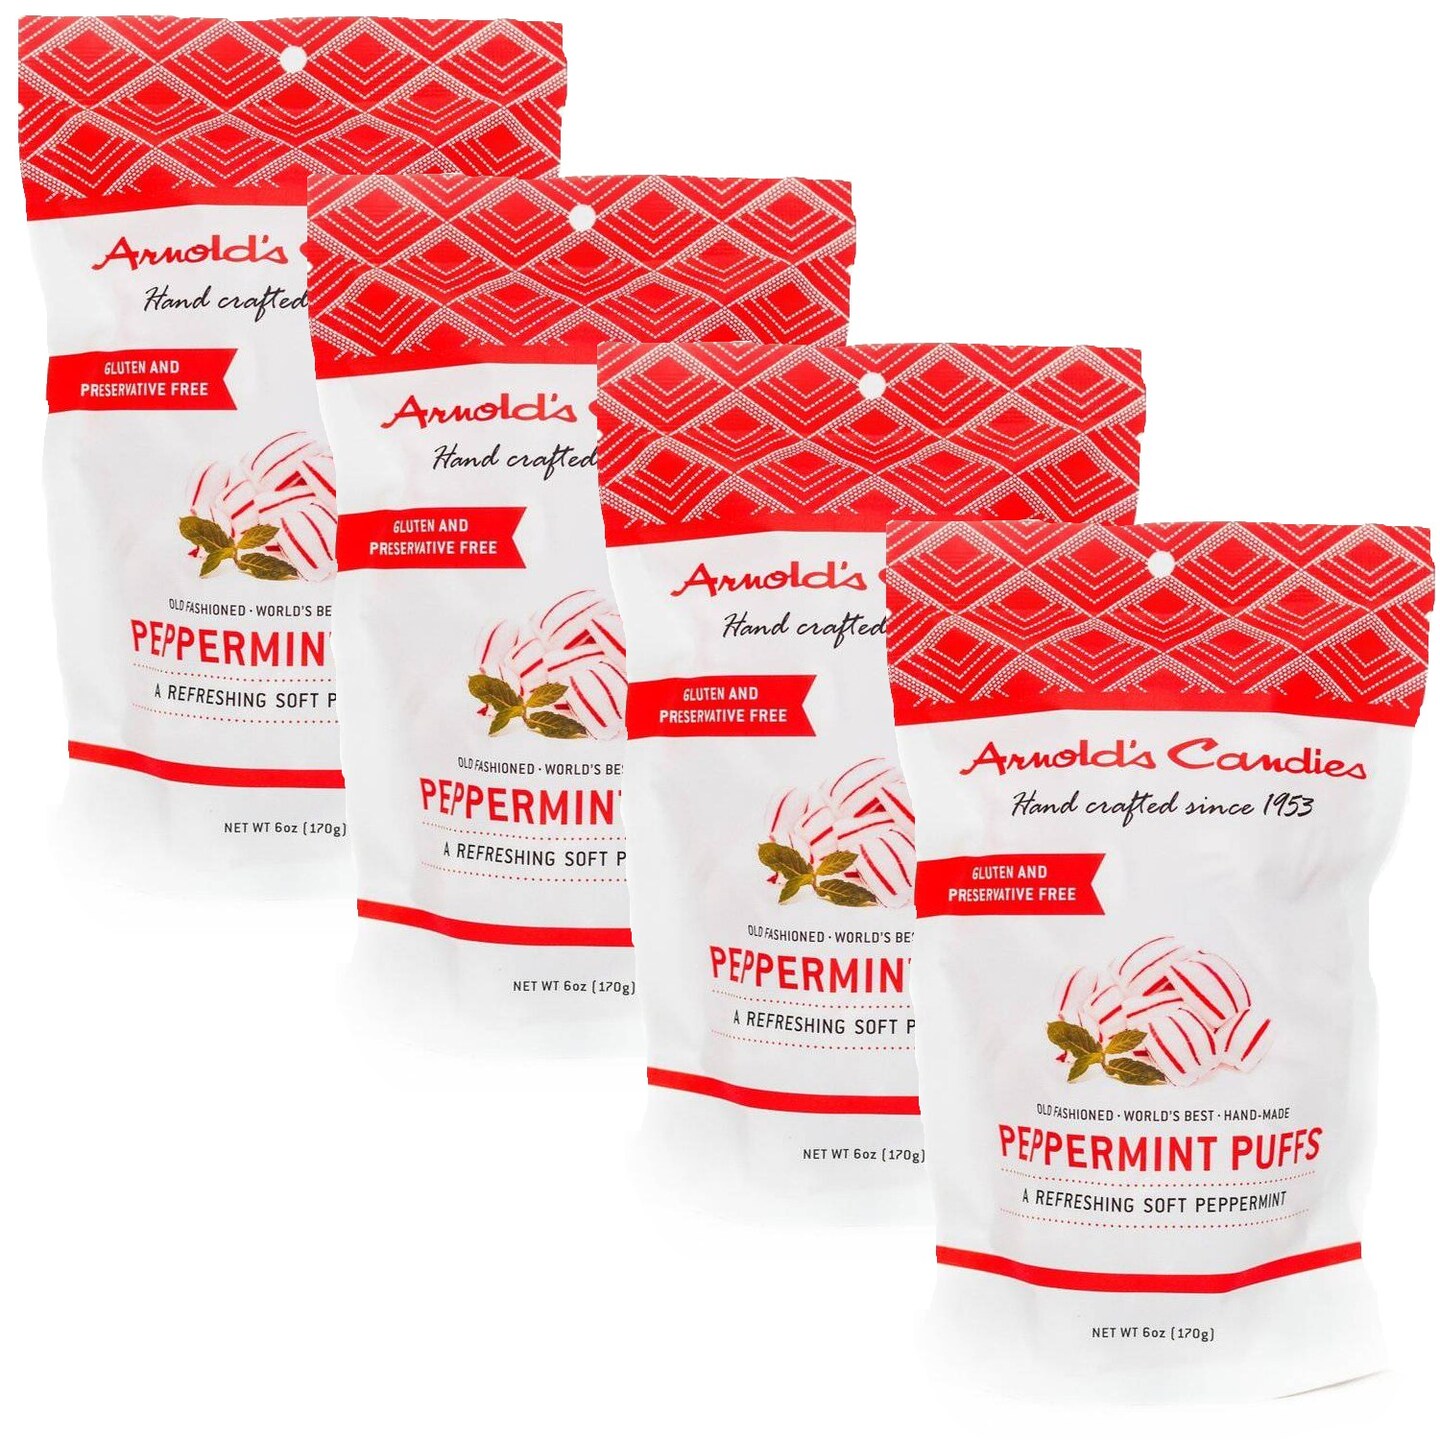 Arnold&#x27;s Peppermint Sugar Puffs Light and Airy Snack Pack of 4 6 ounce Bags